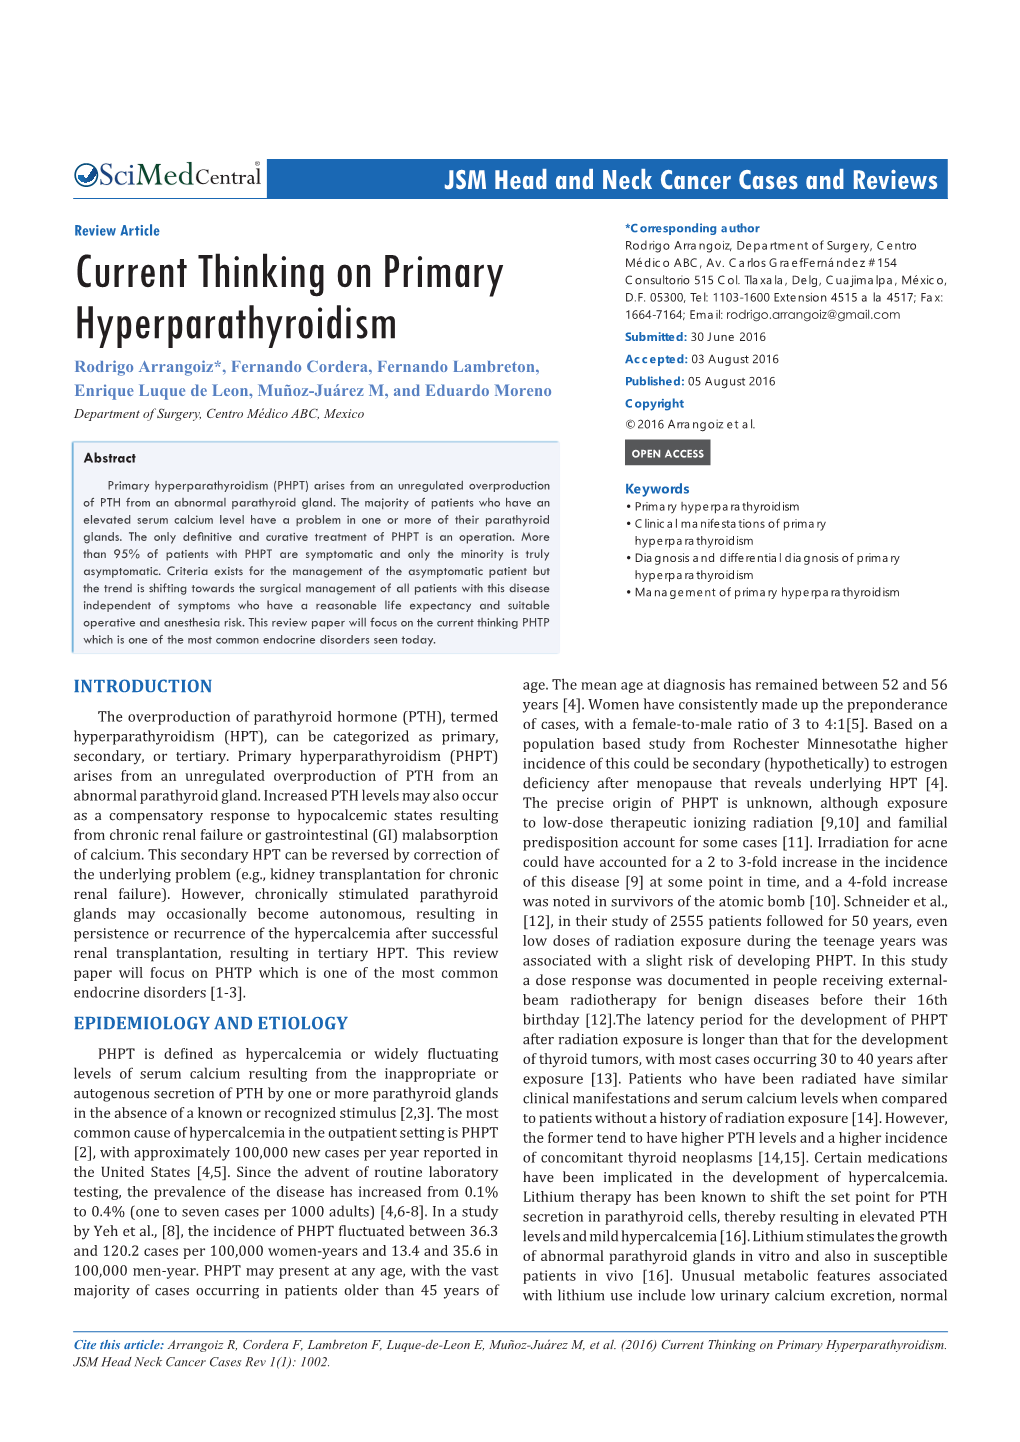 Current Thinking on Primary Hyperparathyroidism